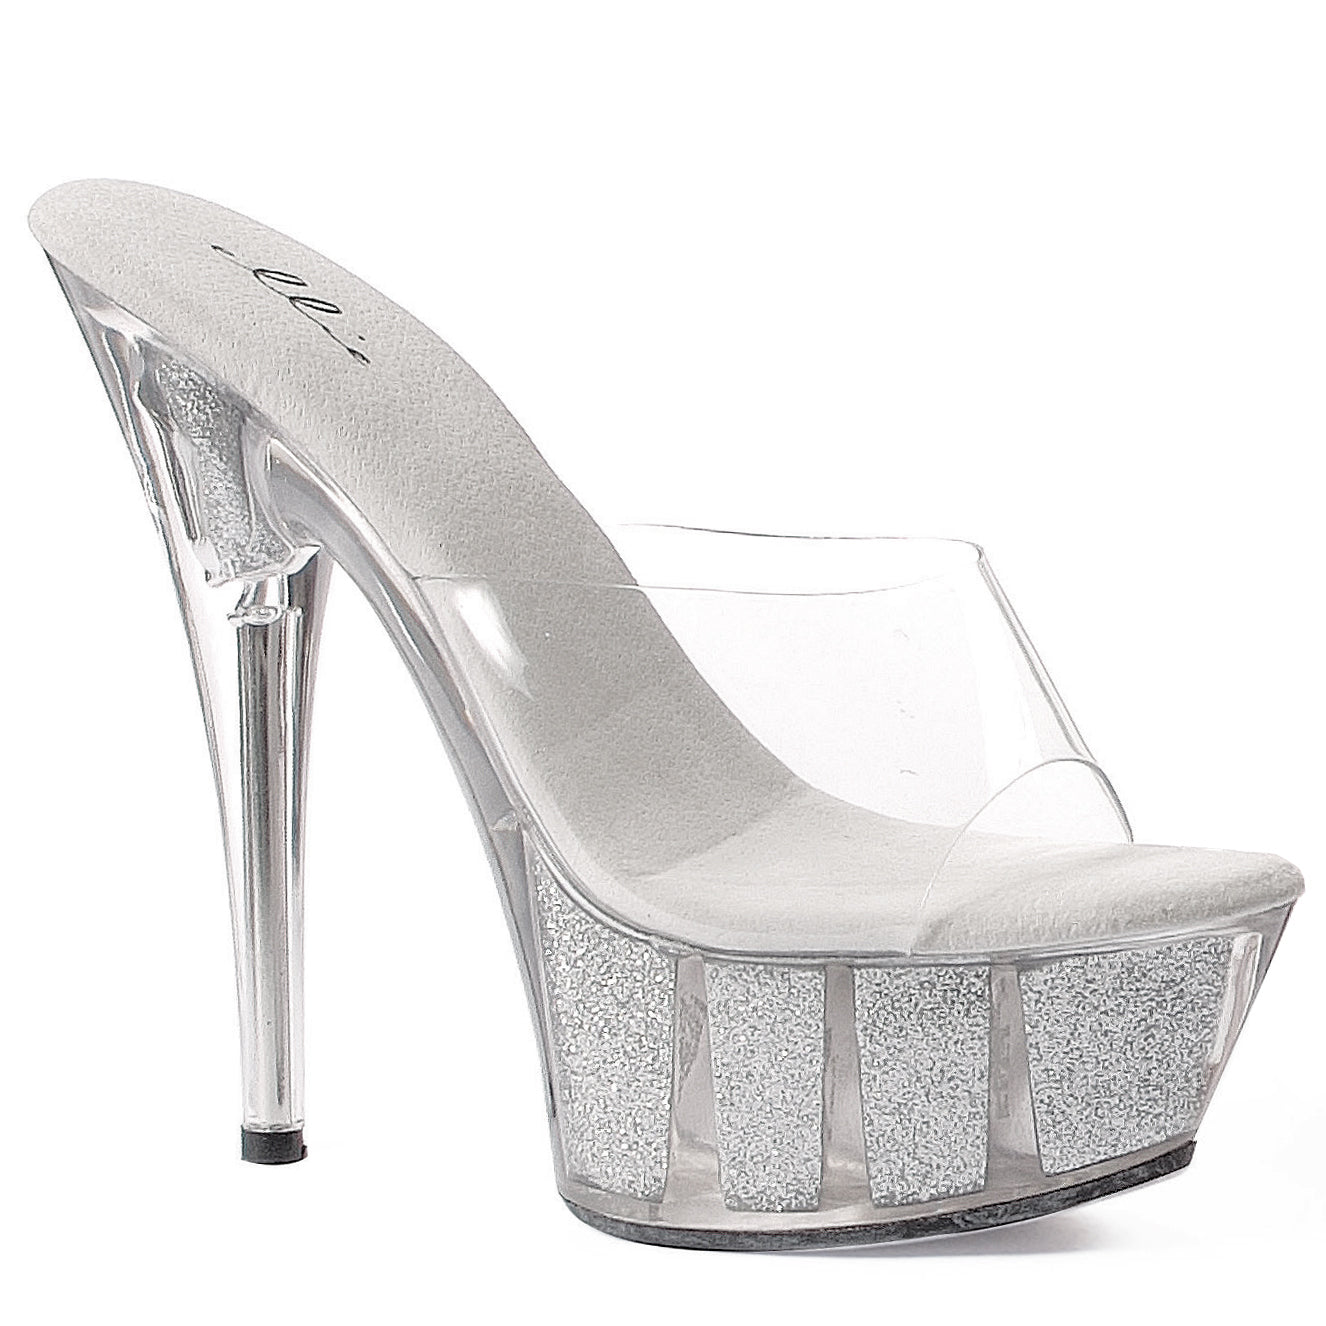 6 Pointed Stiletto Mule With Glitter In Platform